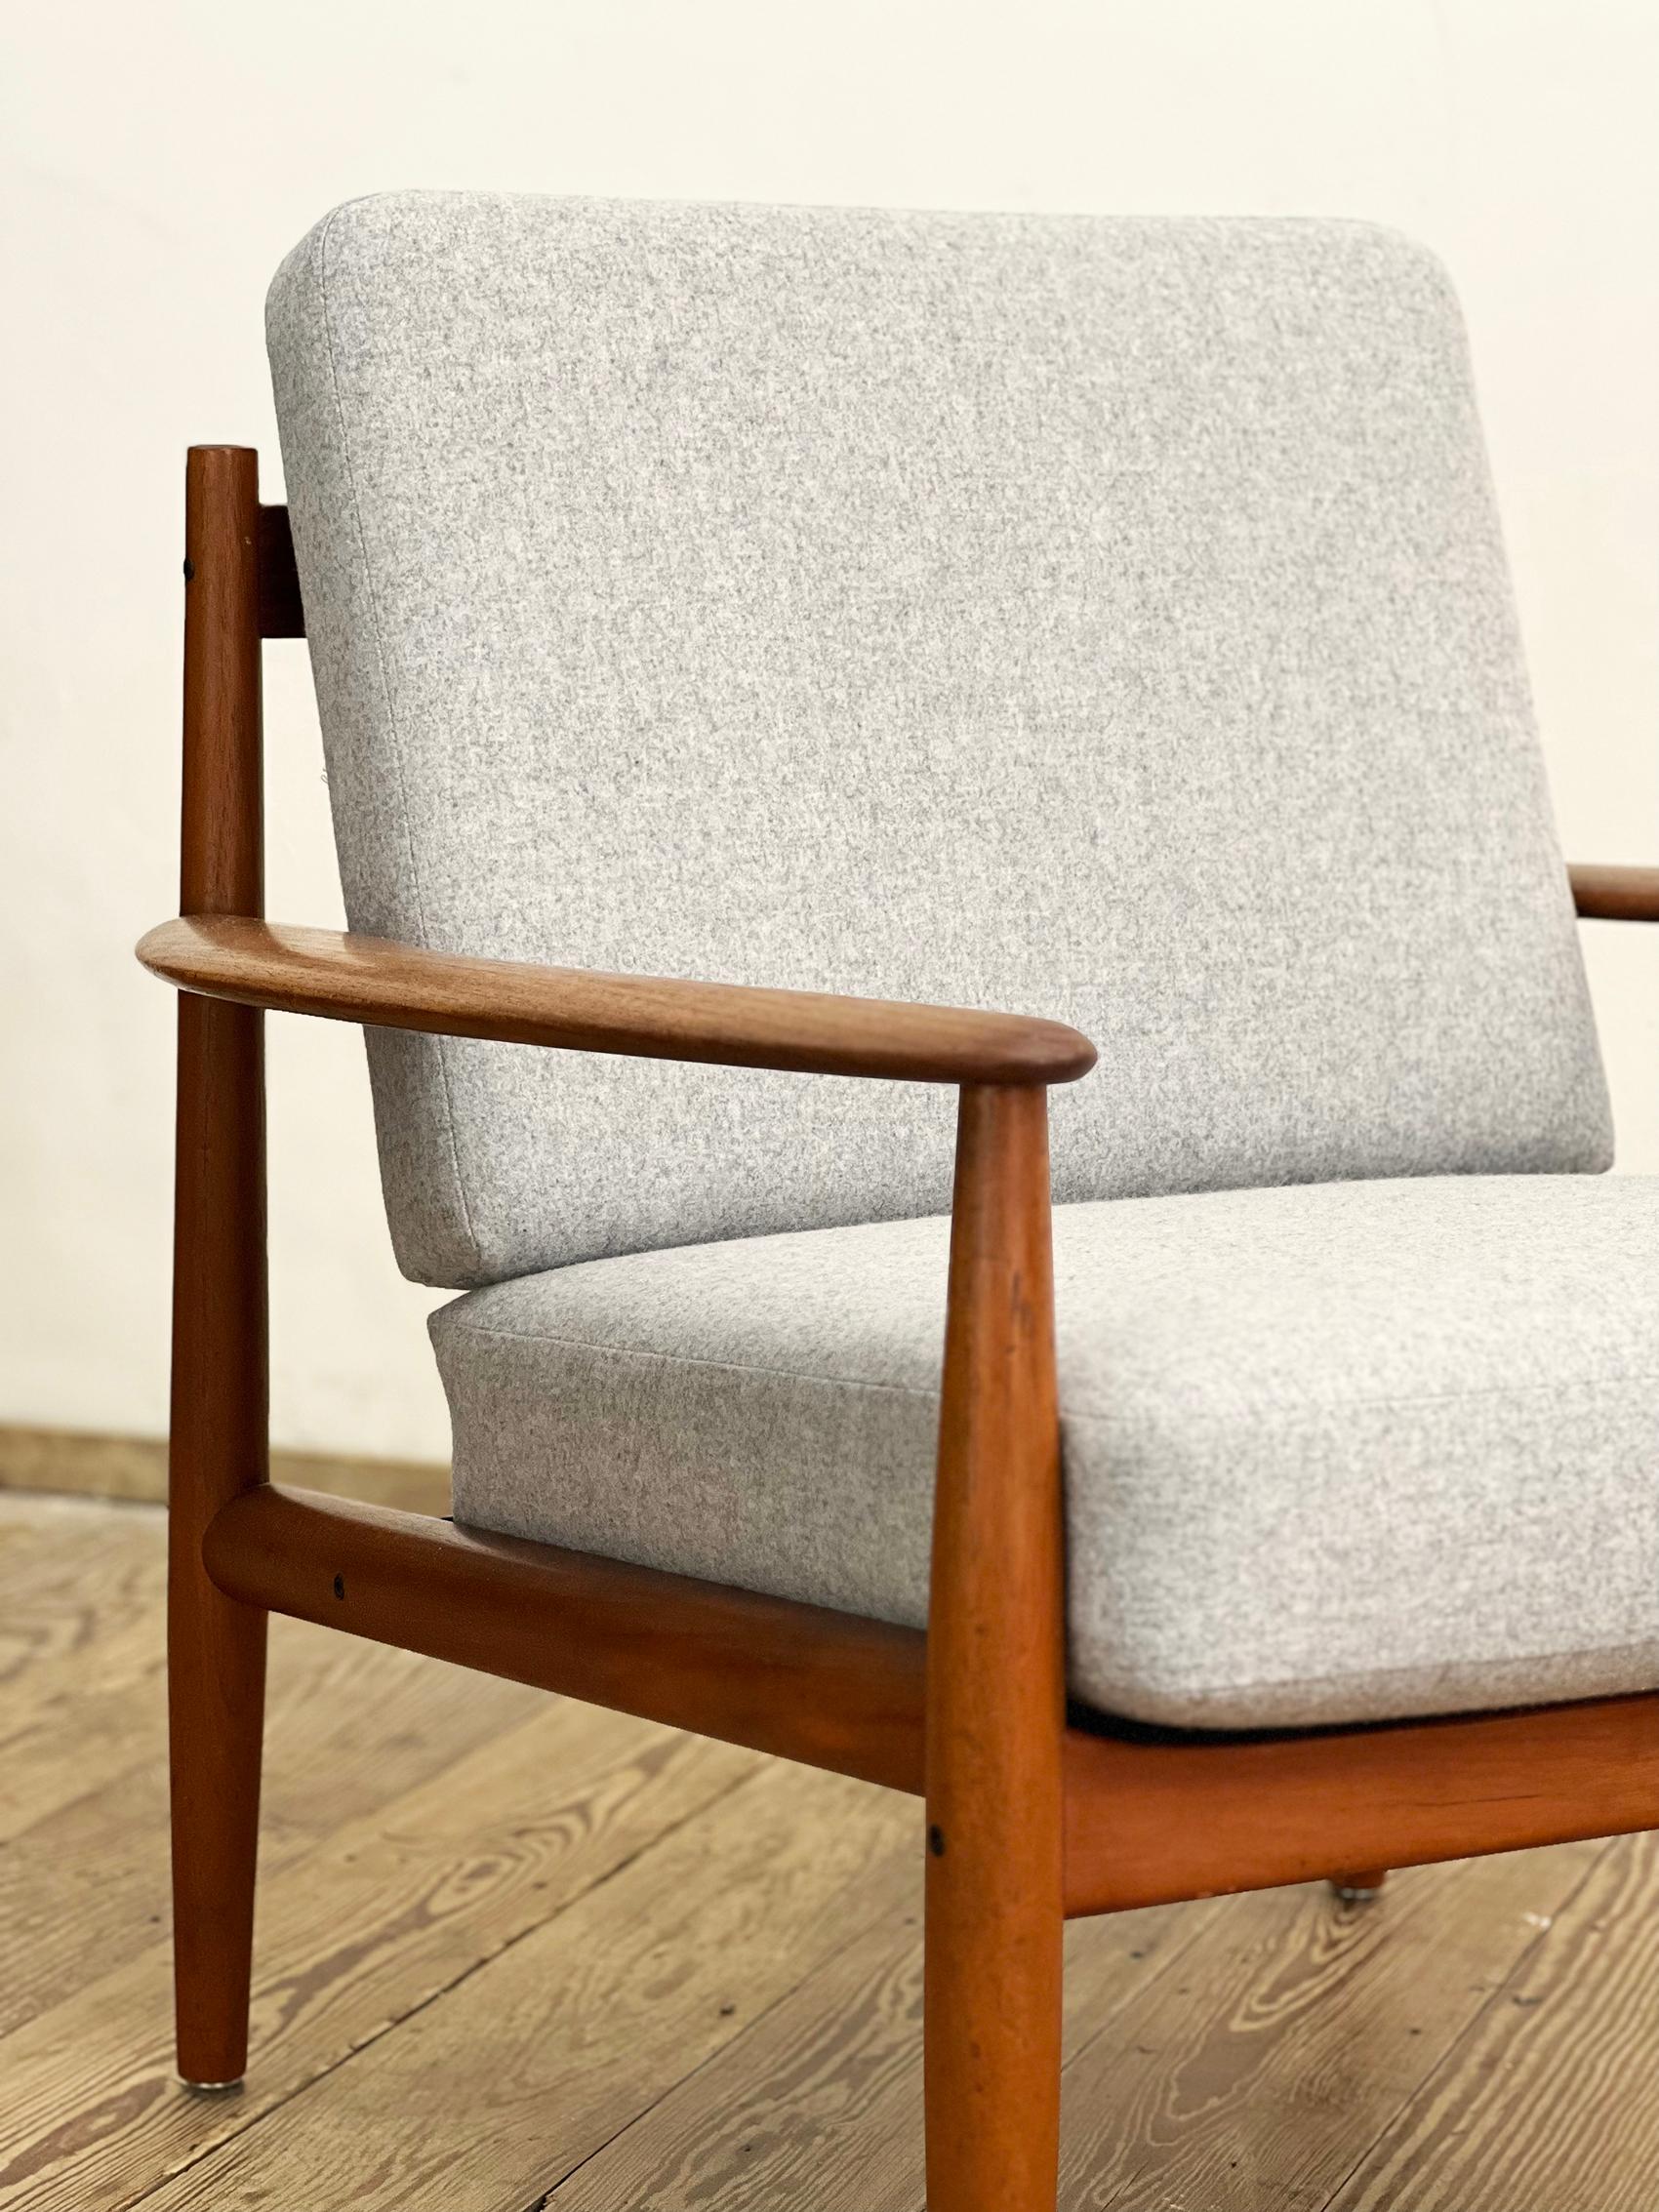 Hand-Carved Danish Mid-Century Armchair, Teak Easy Chair by Grete Jalk, France & Søn, 1950s For Sale